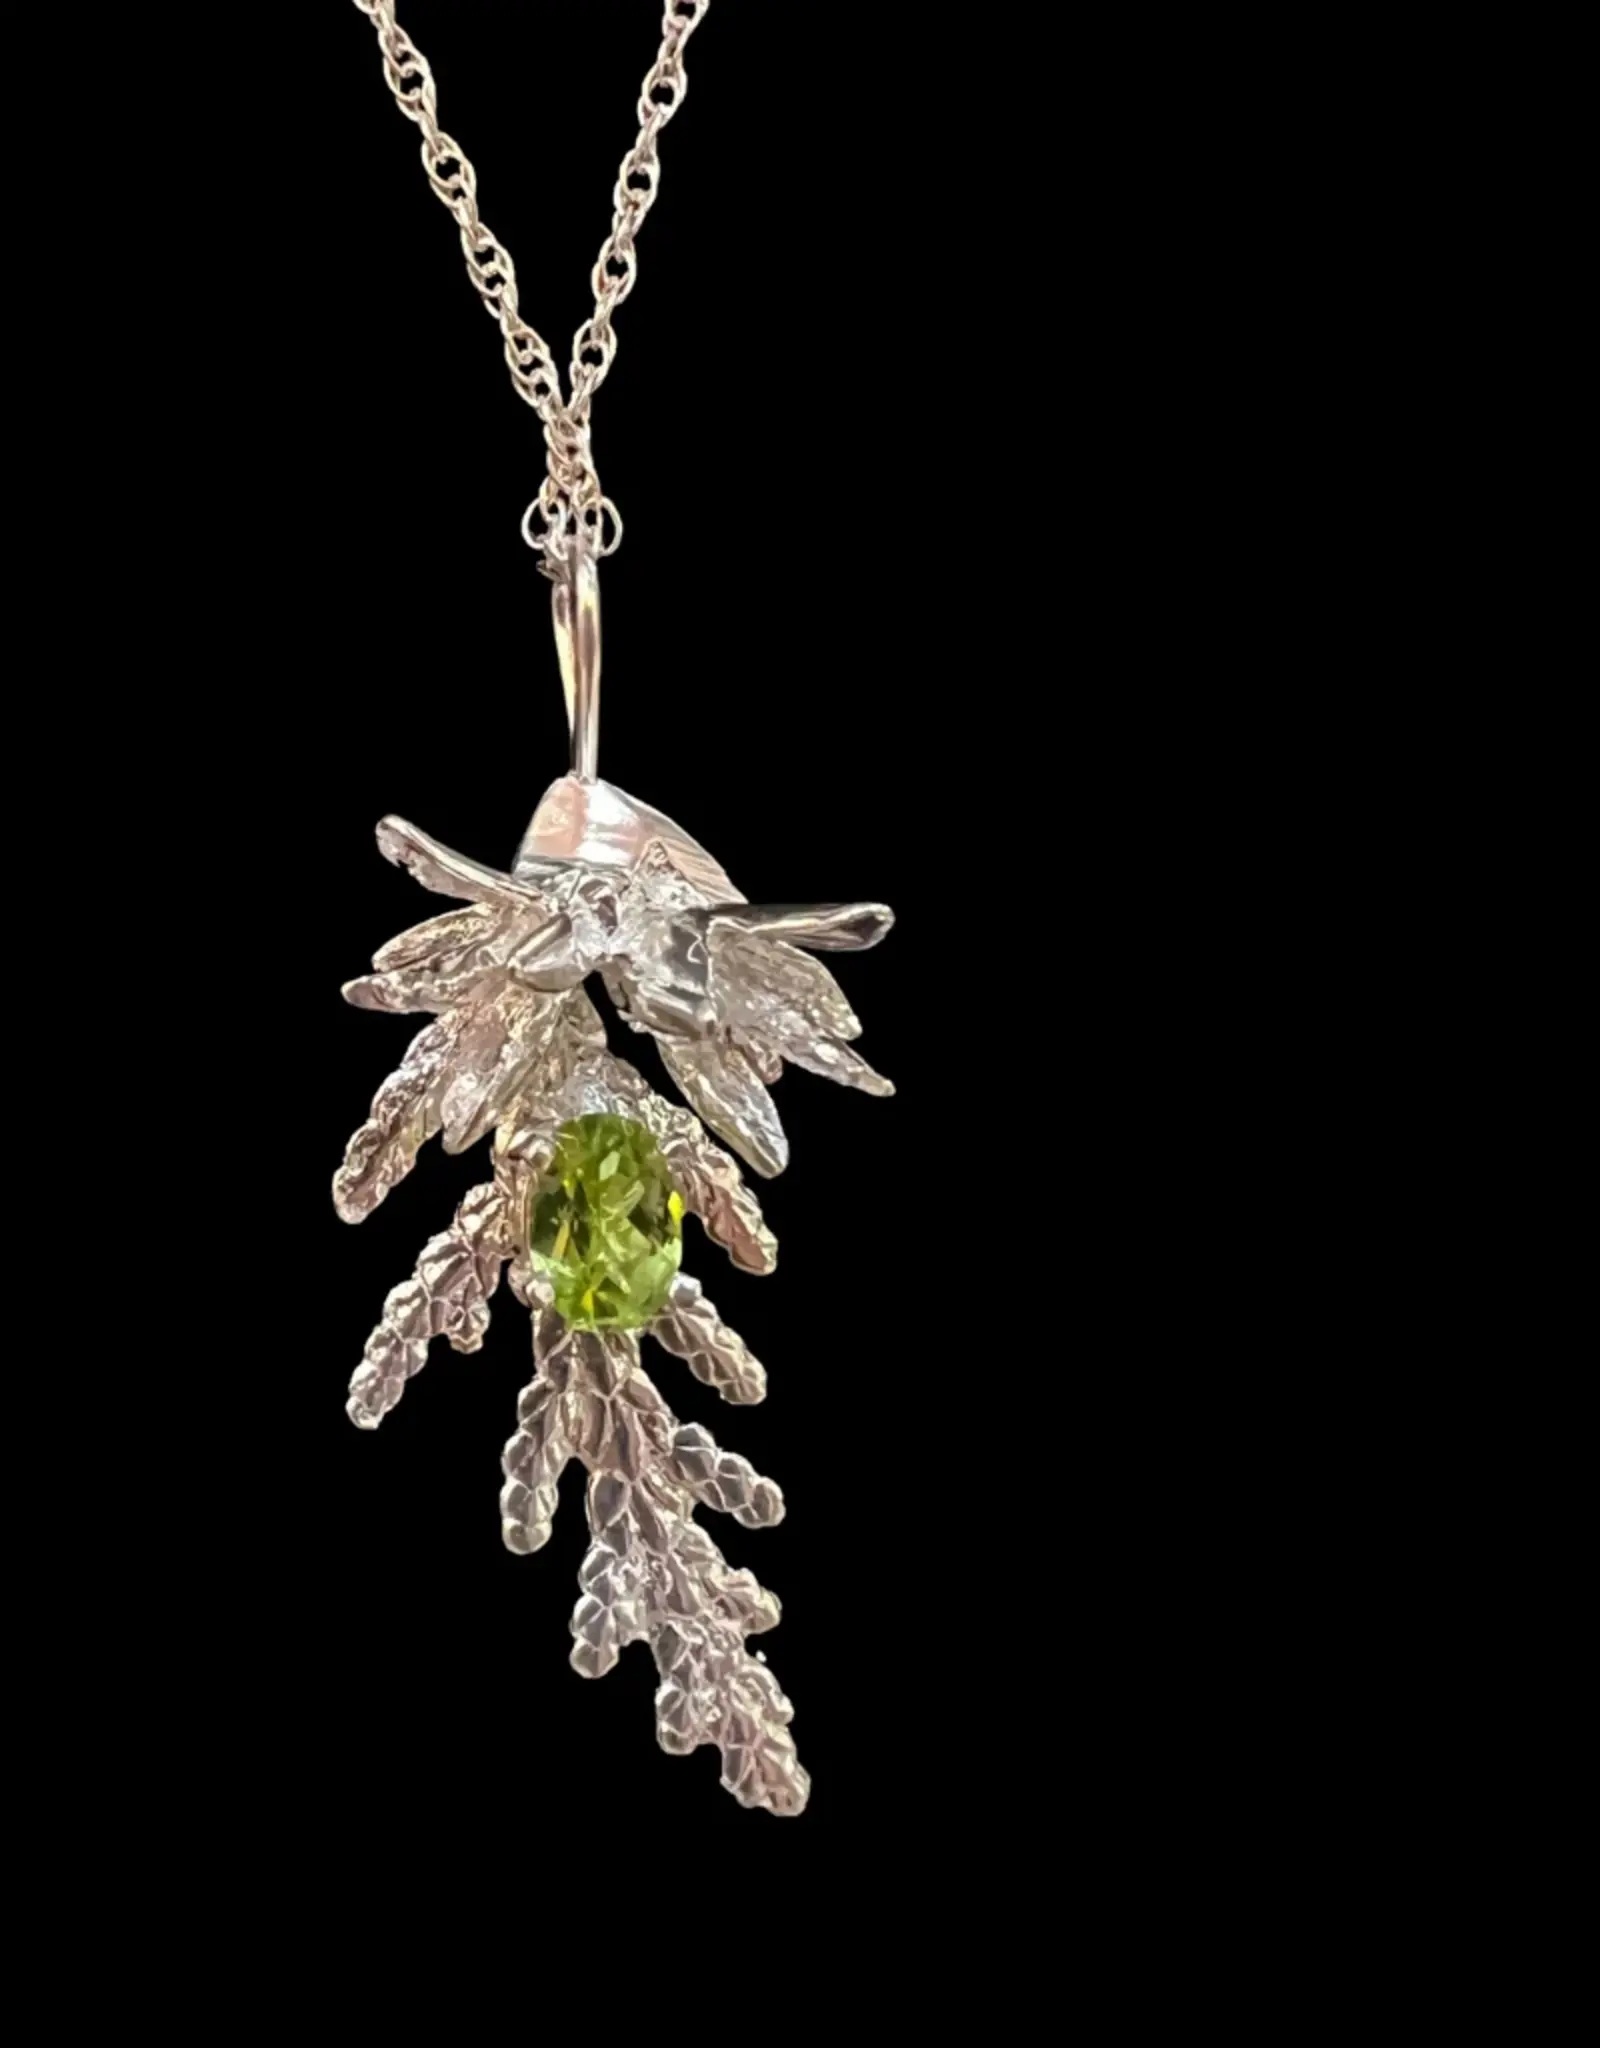 Amulette JFIHCP4P Sterling Silver 925 Cedar pendant with Peridot and soft chain